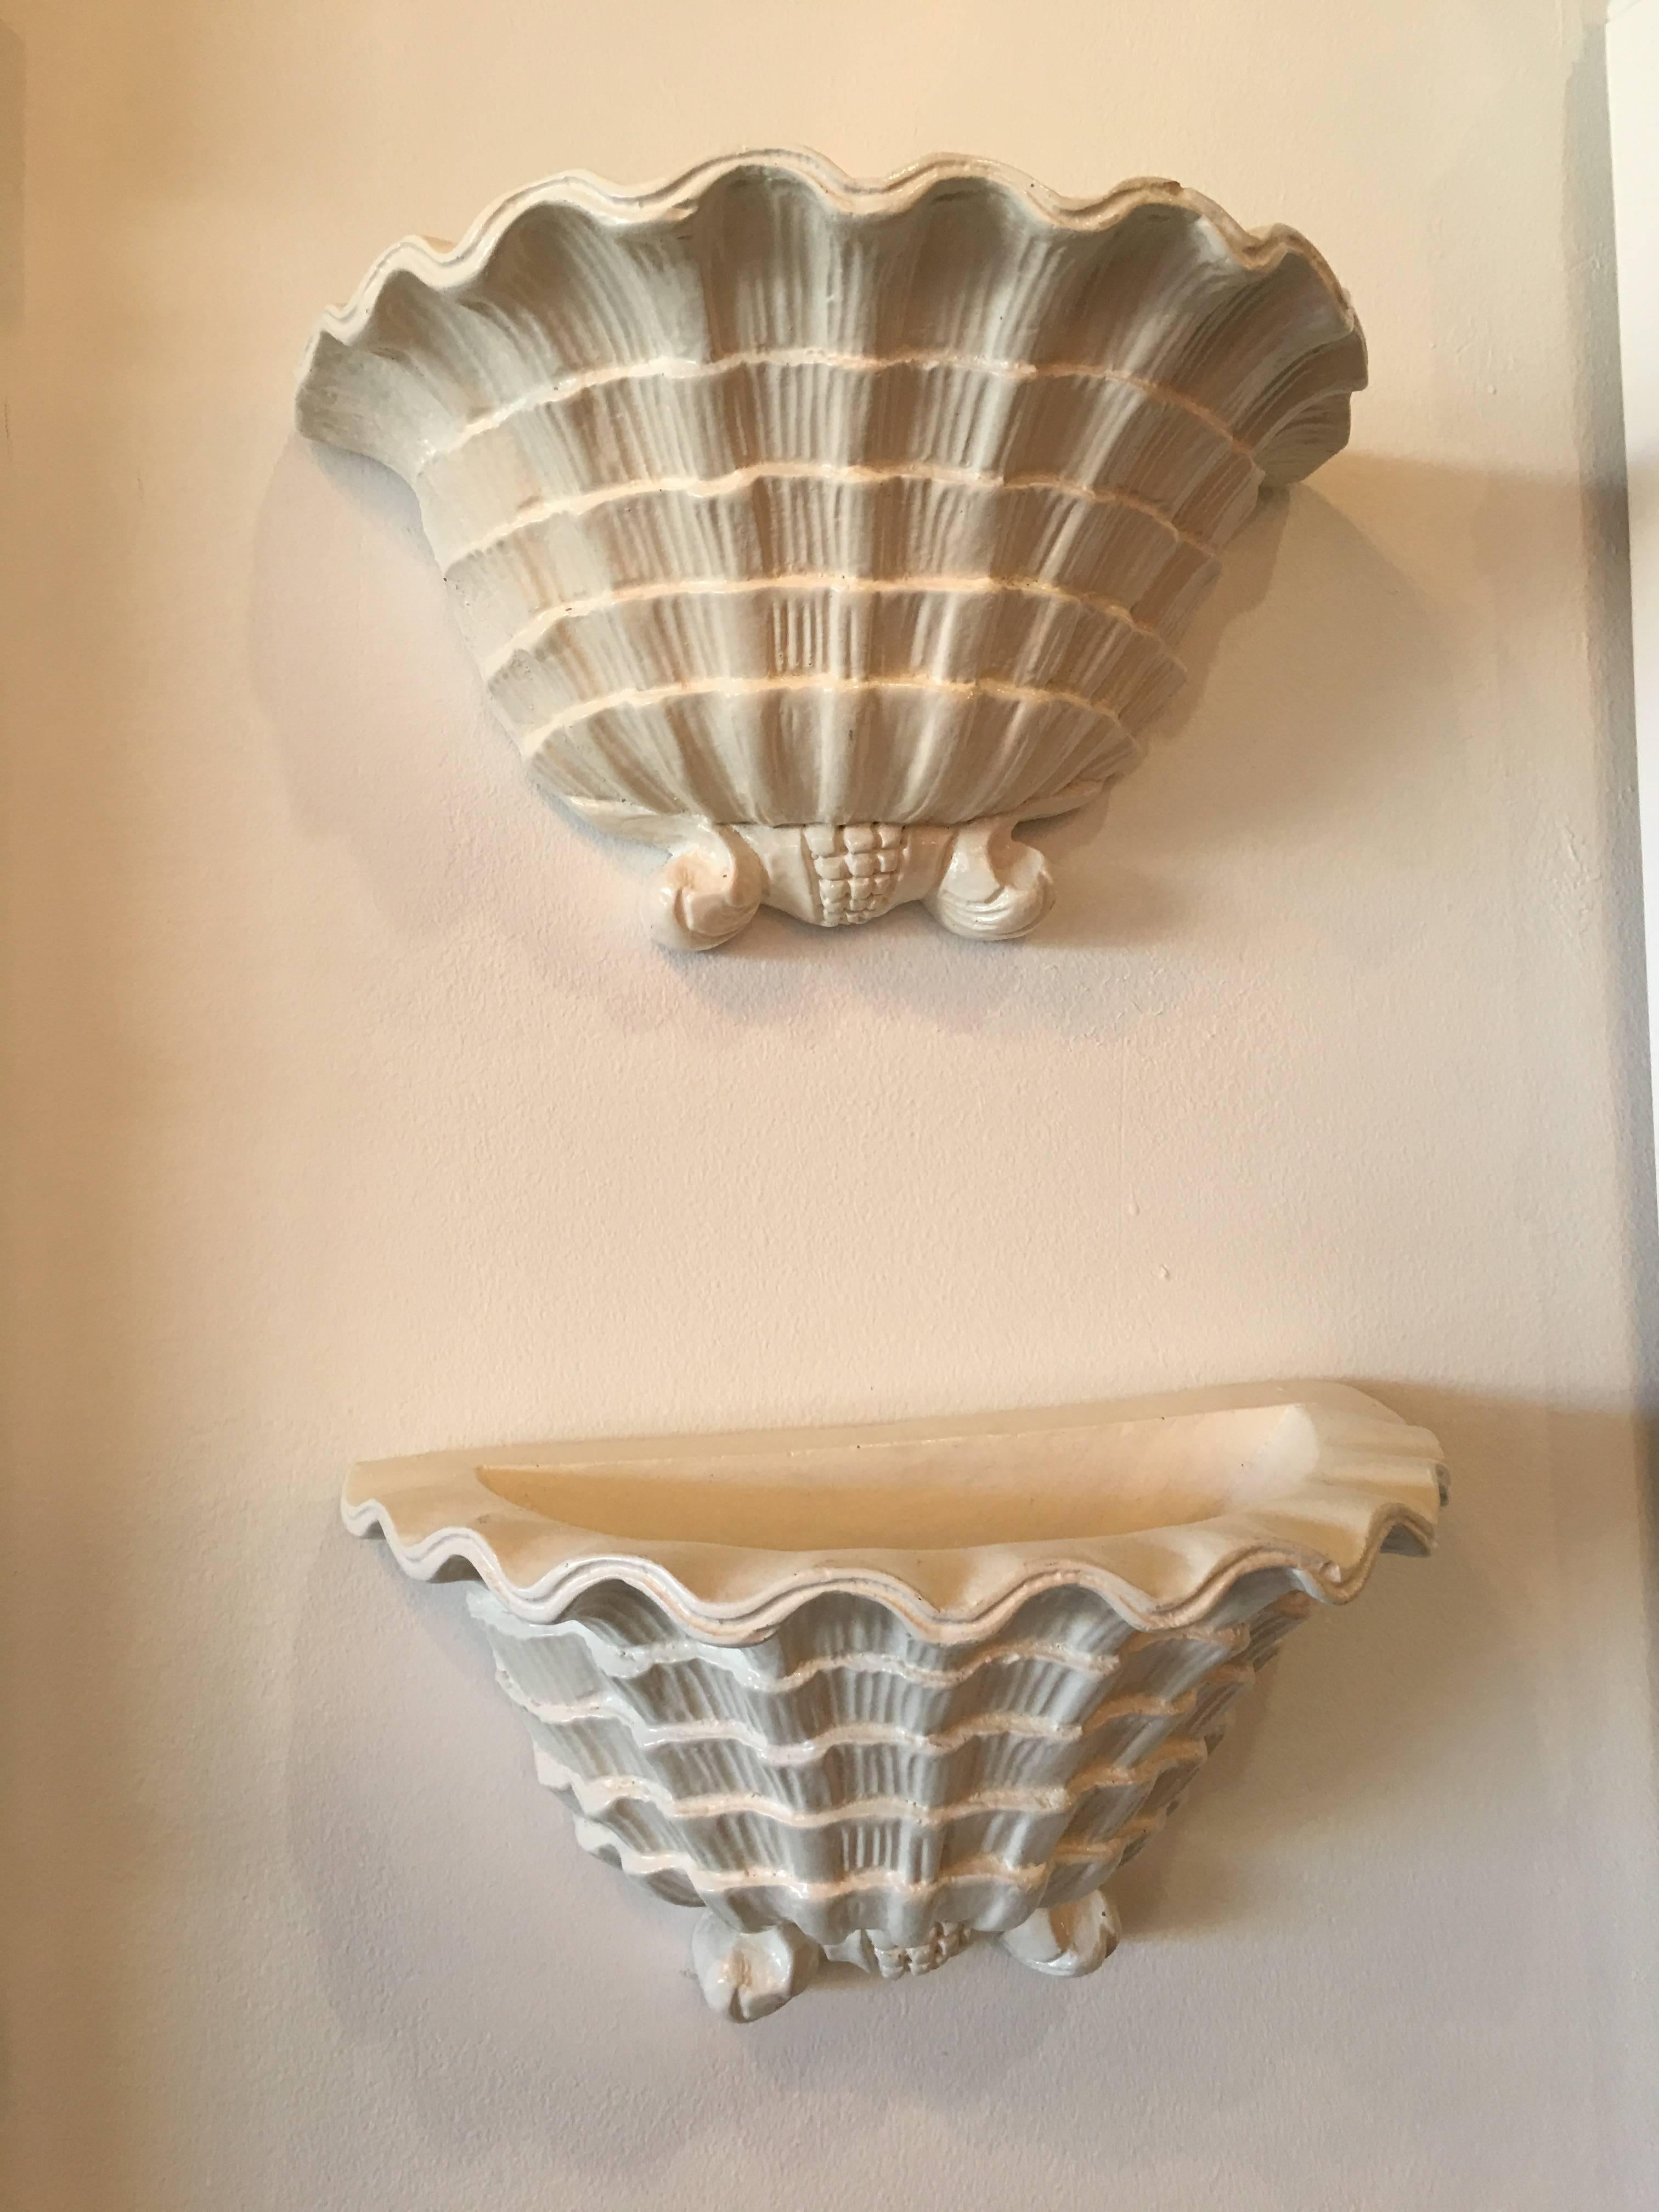 Lovely pair of vintage plaster scalloped shell seashell wall sconces in the manner of Serge Roche. Comes ready to hang. Palm Beach perfection!